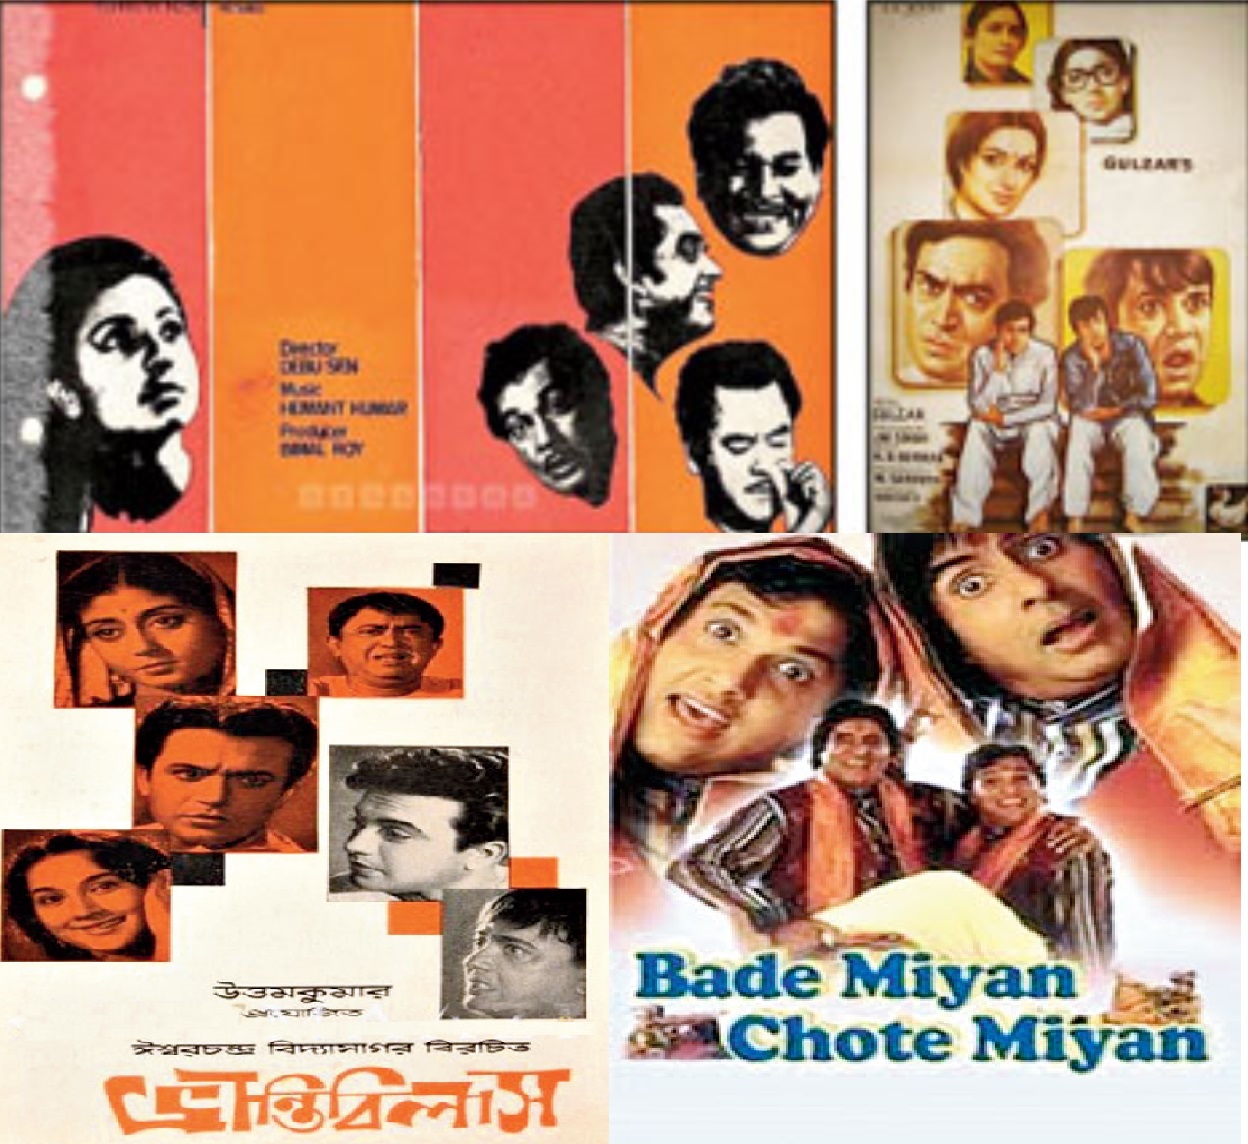 This Bhanu Bandyopadhyay starrer was a superhit in 1963 and earned 300 per cent of the shoe-string budget. Five years later, the first Hindi remake was not a big success despite the presence of the comic man of the season. Years later the writer of the first remake made a second attempt, this time helming the project as a director. This attempt did not miss the bull’s eye. A literary genius and a social reformer cum educationist cum author from the Bengali Renaissance period are associated with these films. Who are they?